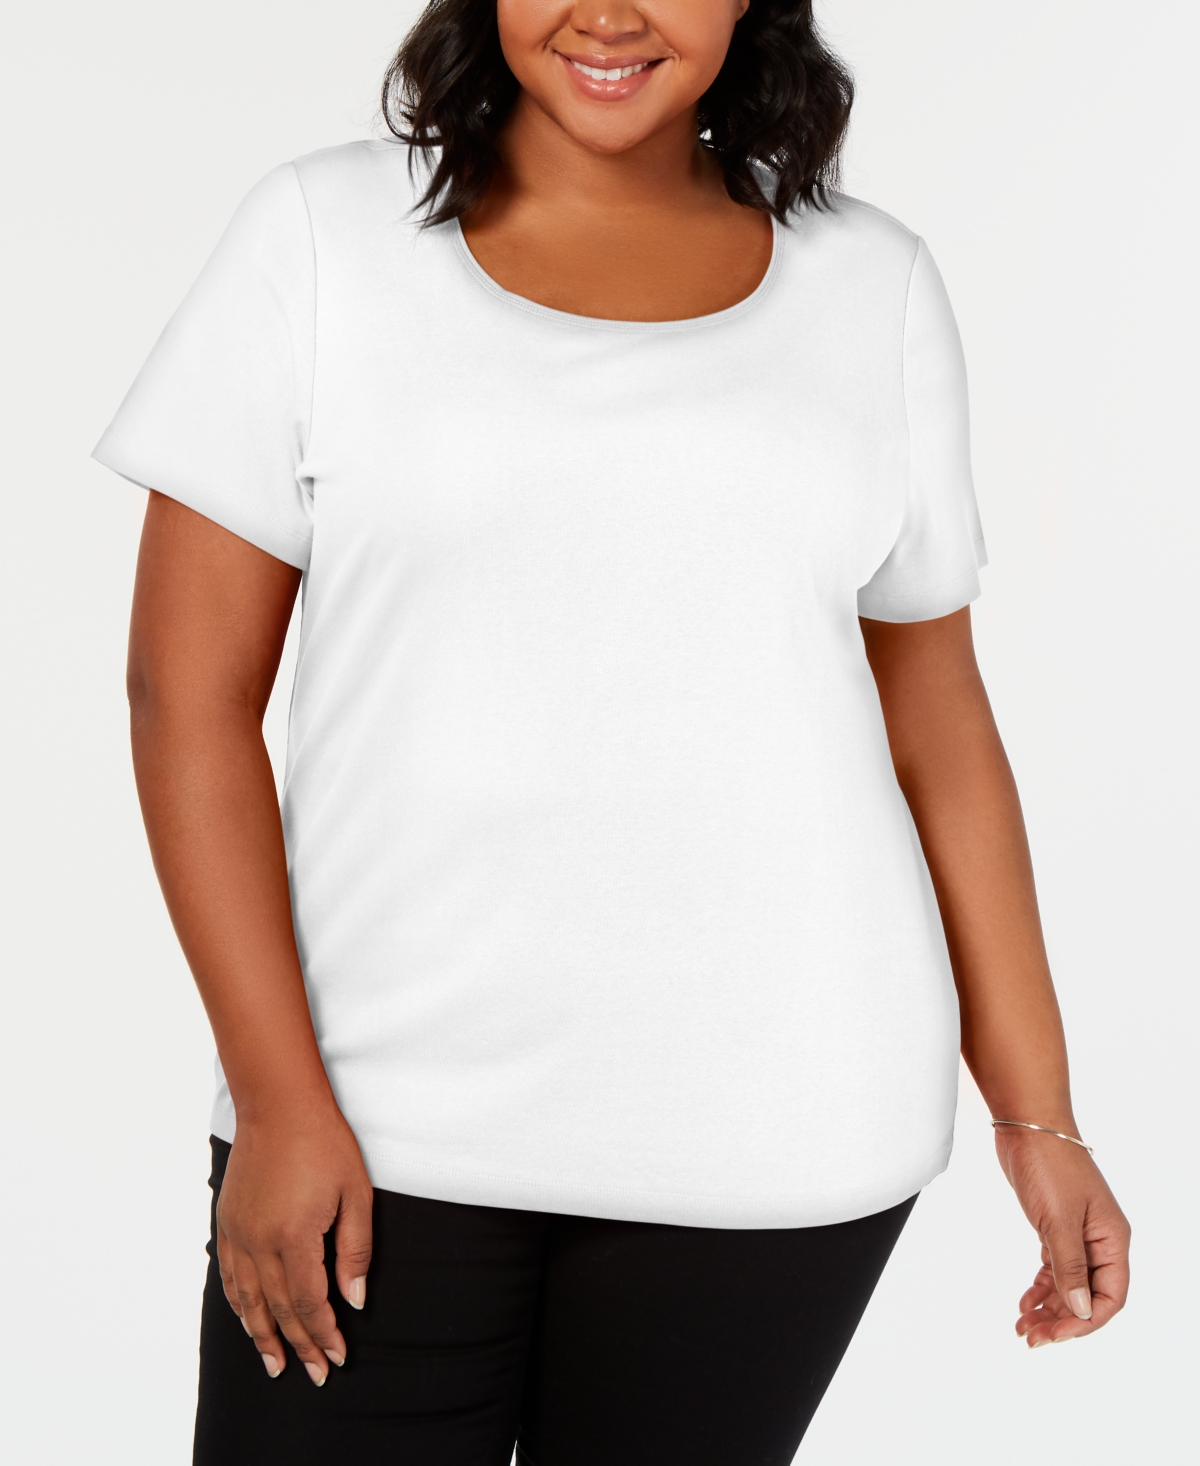 Plus Size Short Sleeve Scoop-Neck Top, Created for Macy's - Bright White